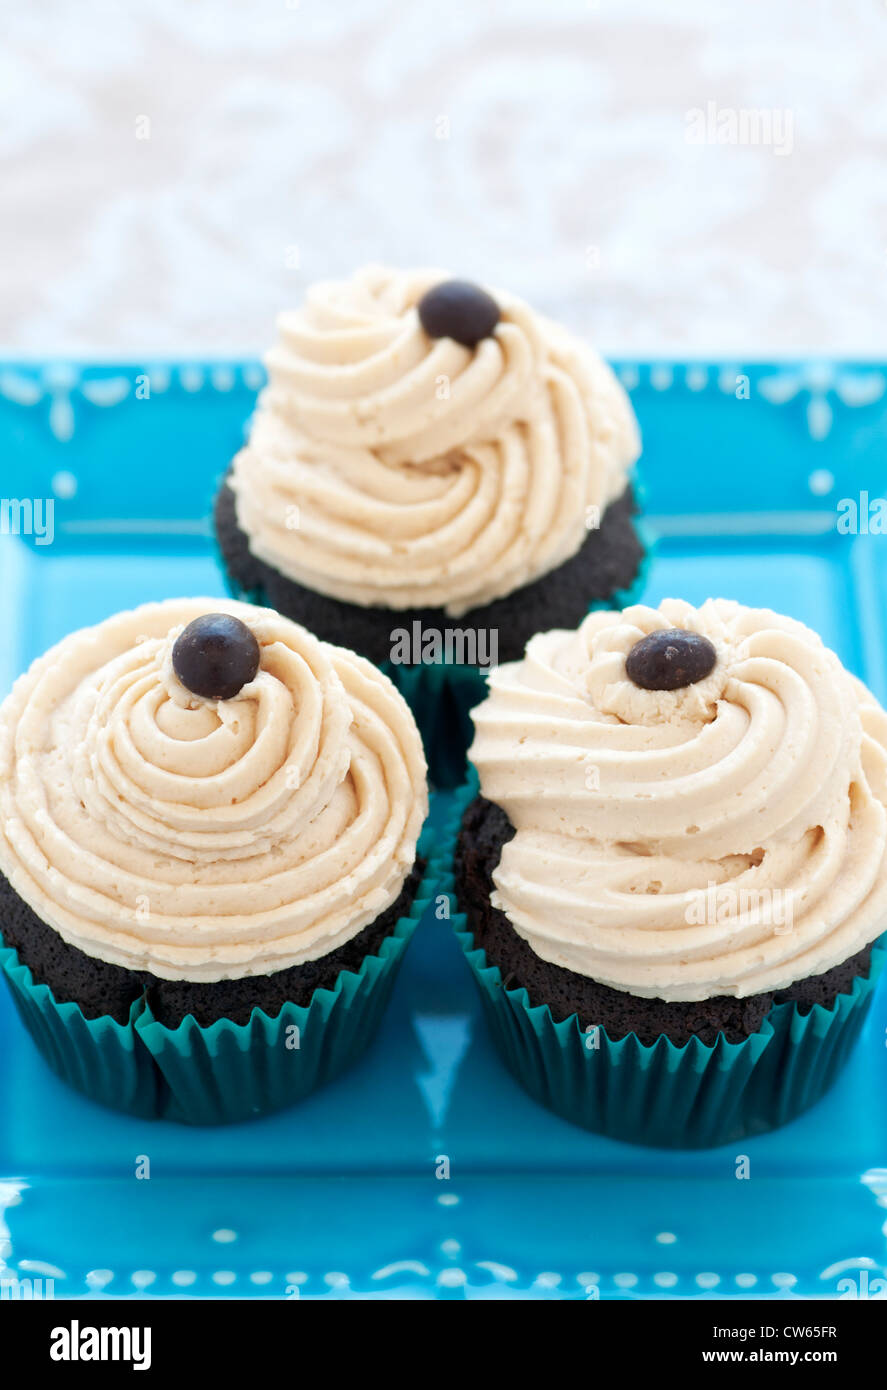 Chocolate Cupcakes with coffee buttercream and chocolate espresso bean on turquoise plate Stock Photo